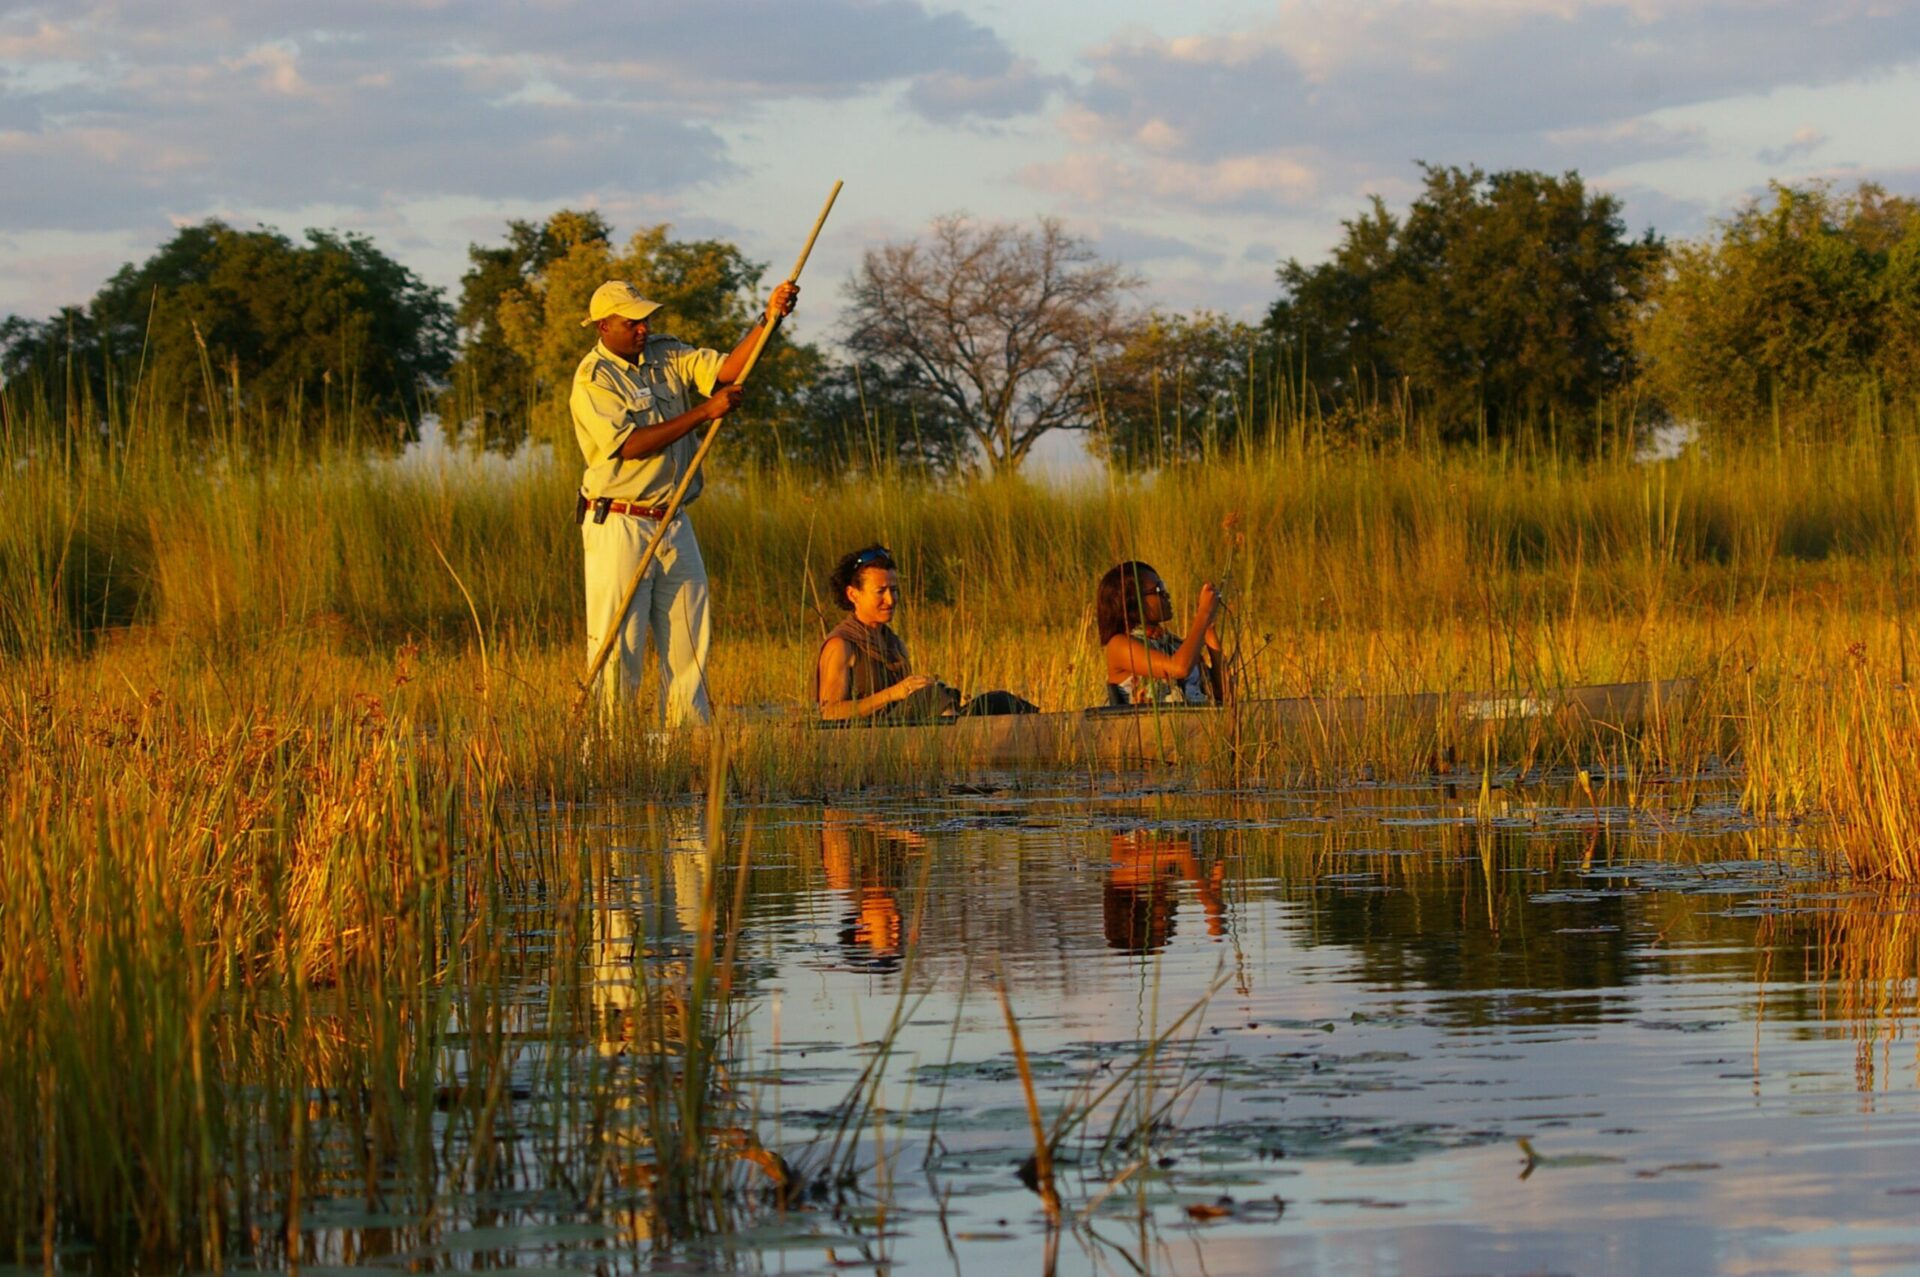 mokoro in the waterways of okavango delta at xugana camp with 2 people and 1 guide